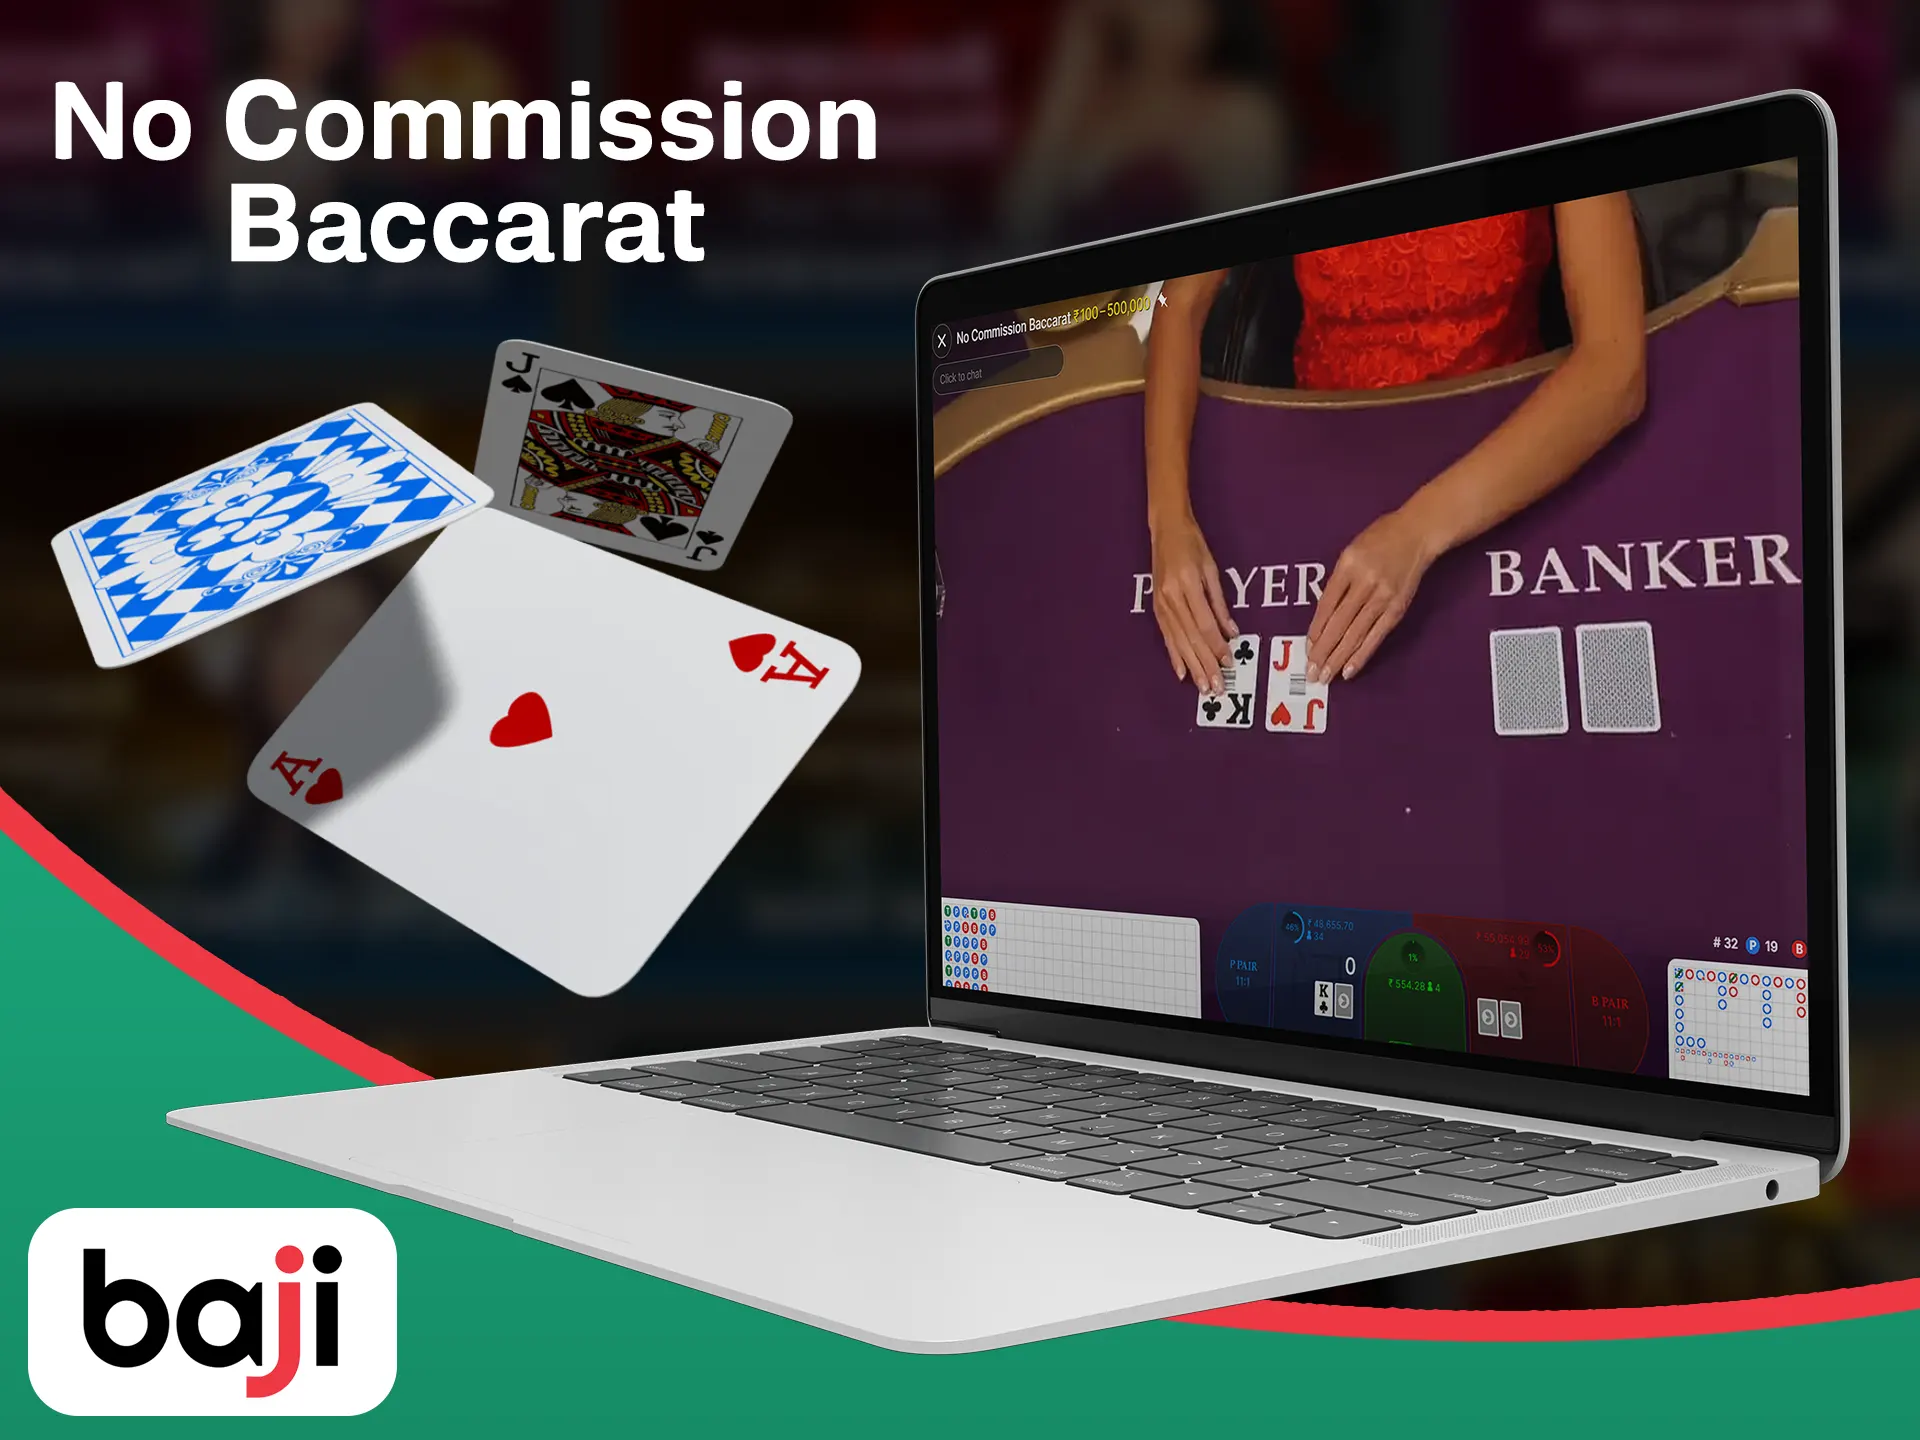 Don't lose time and money with the no commission type of baccarat.